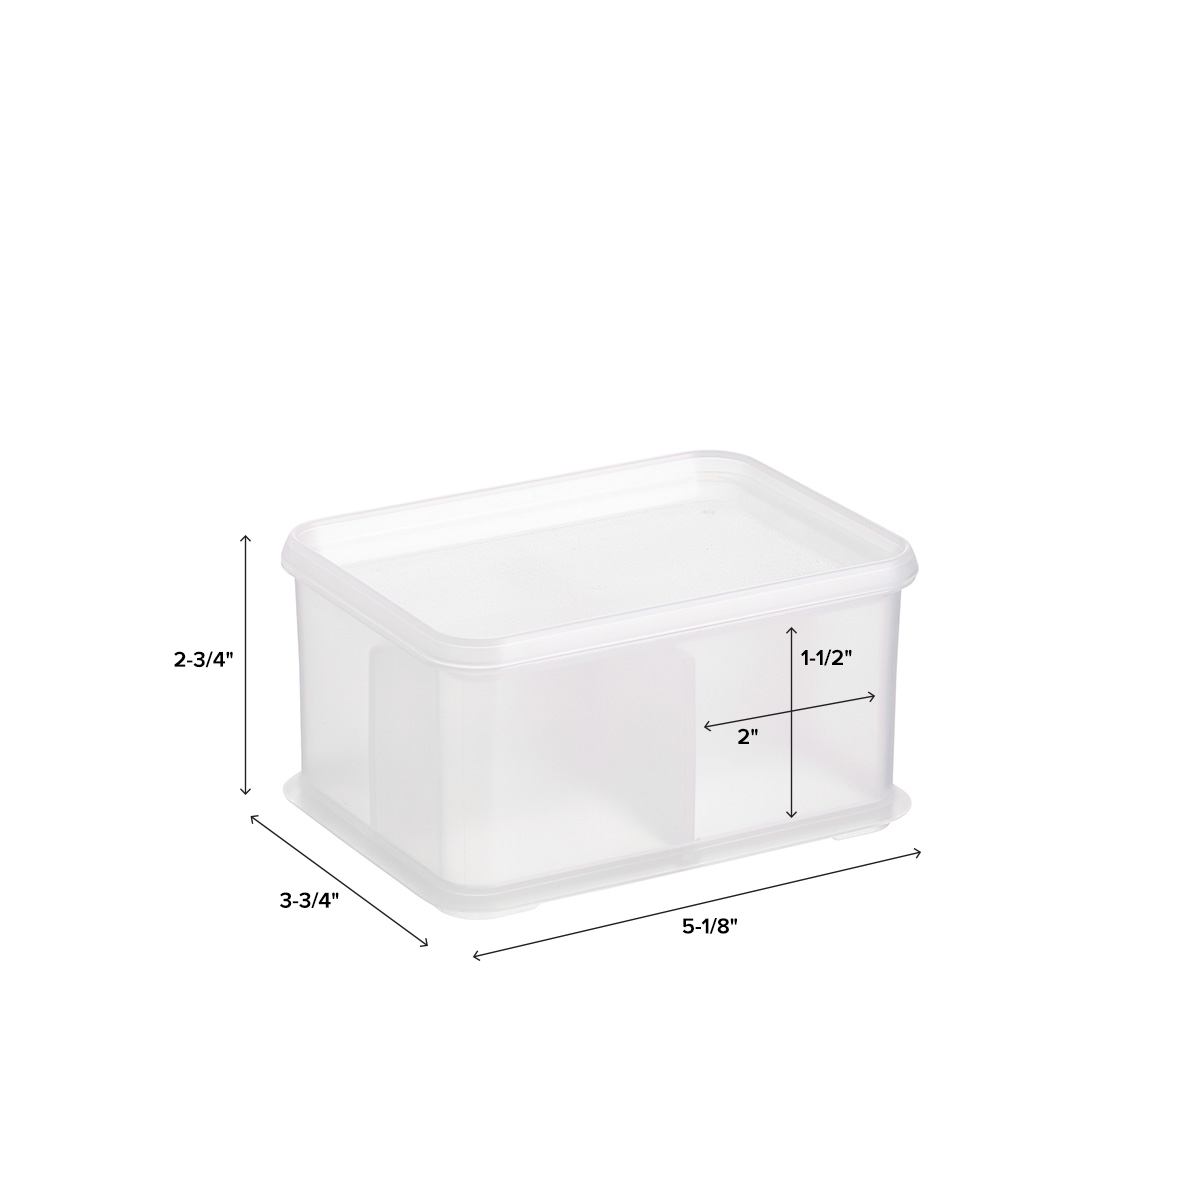 https://www.containerstore.com/catalogimages/445804/10080902-Shimo-mini-shallow-lidded-s.jpg